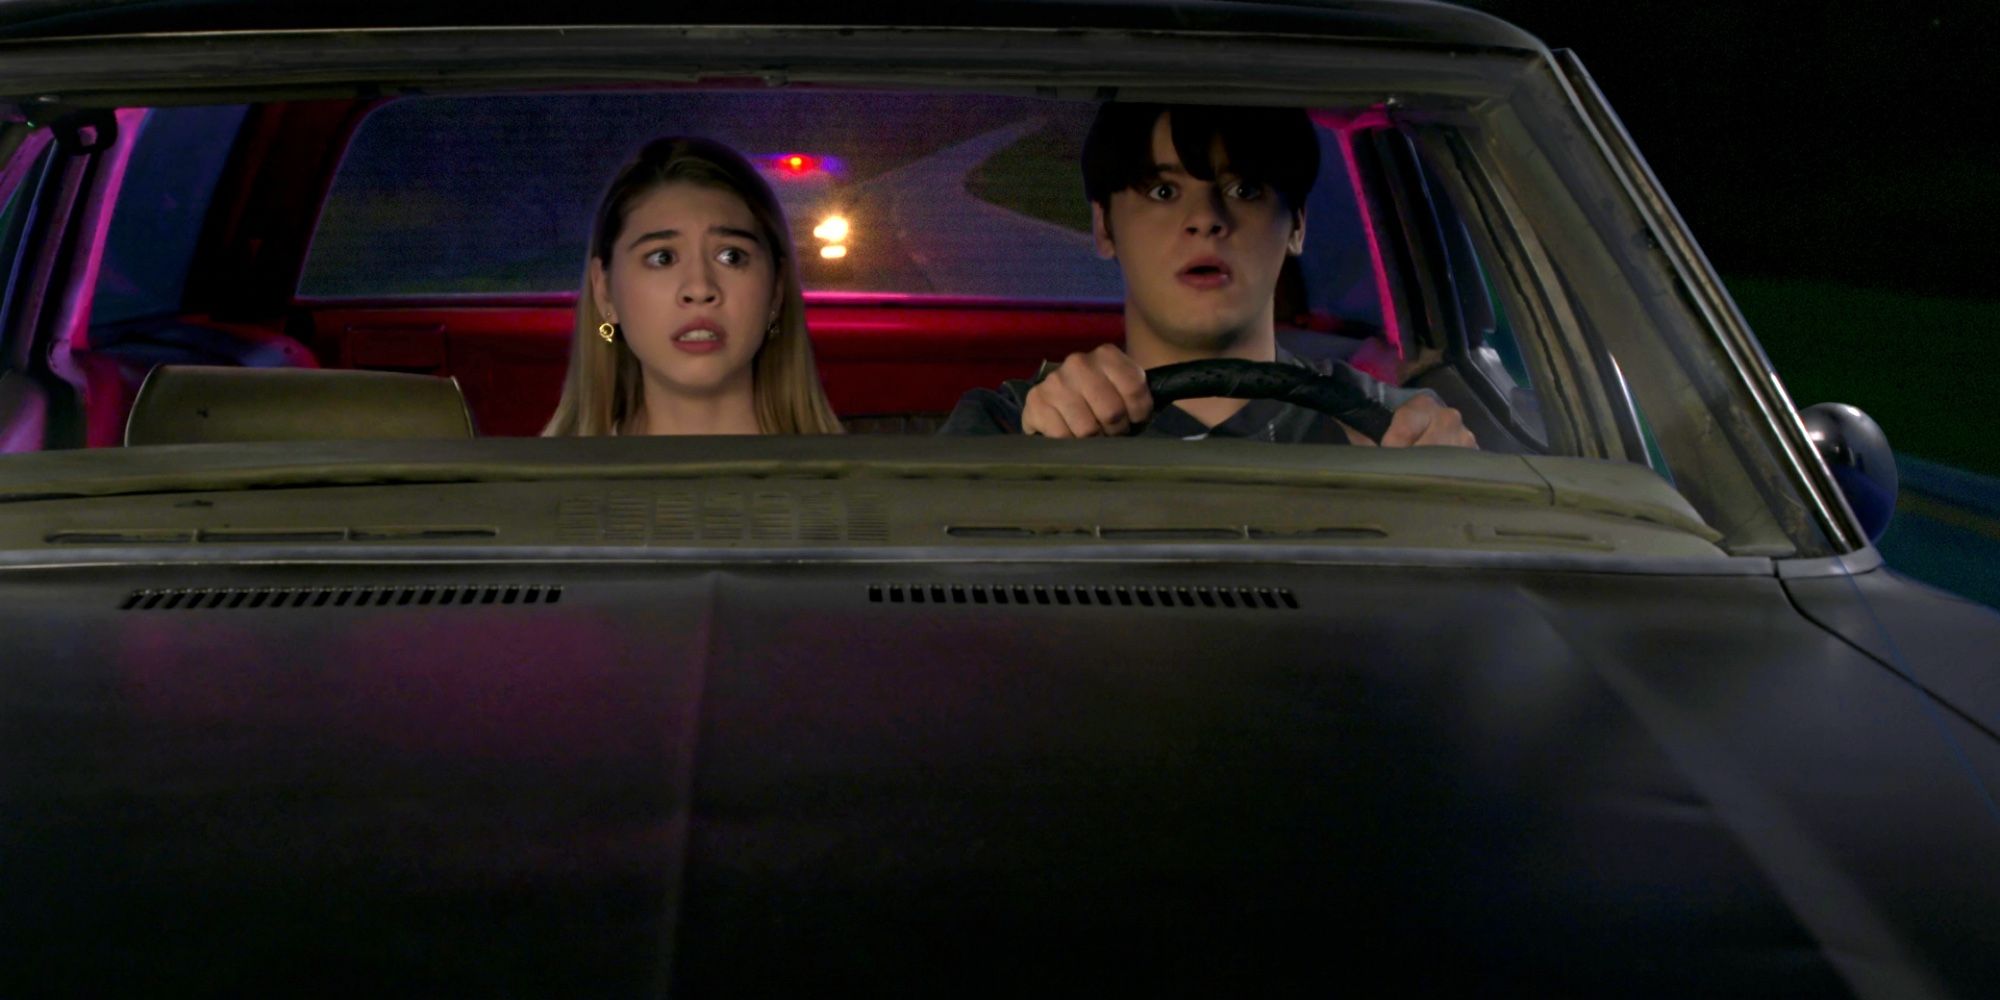 Jay and Leia get pulled over by the police in That 90s Show season 1